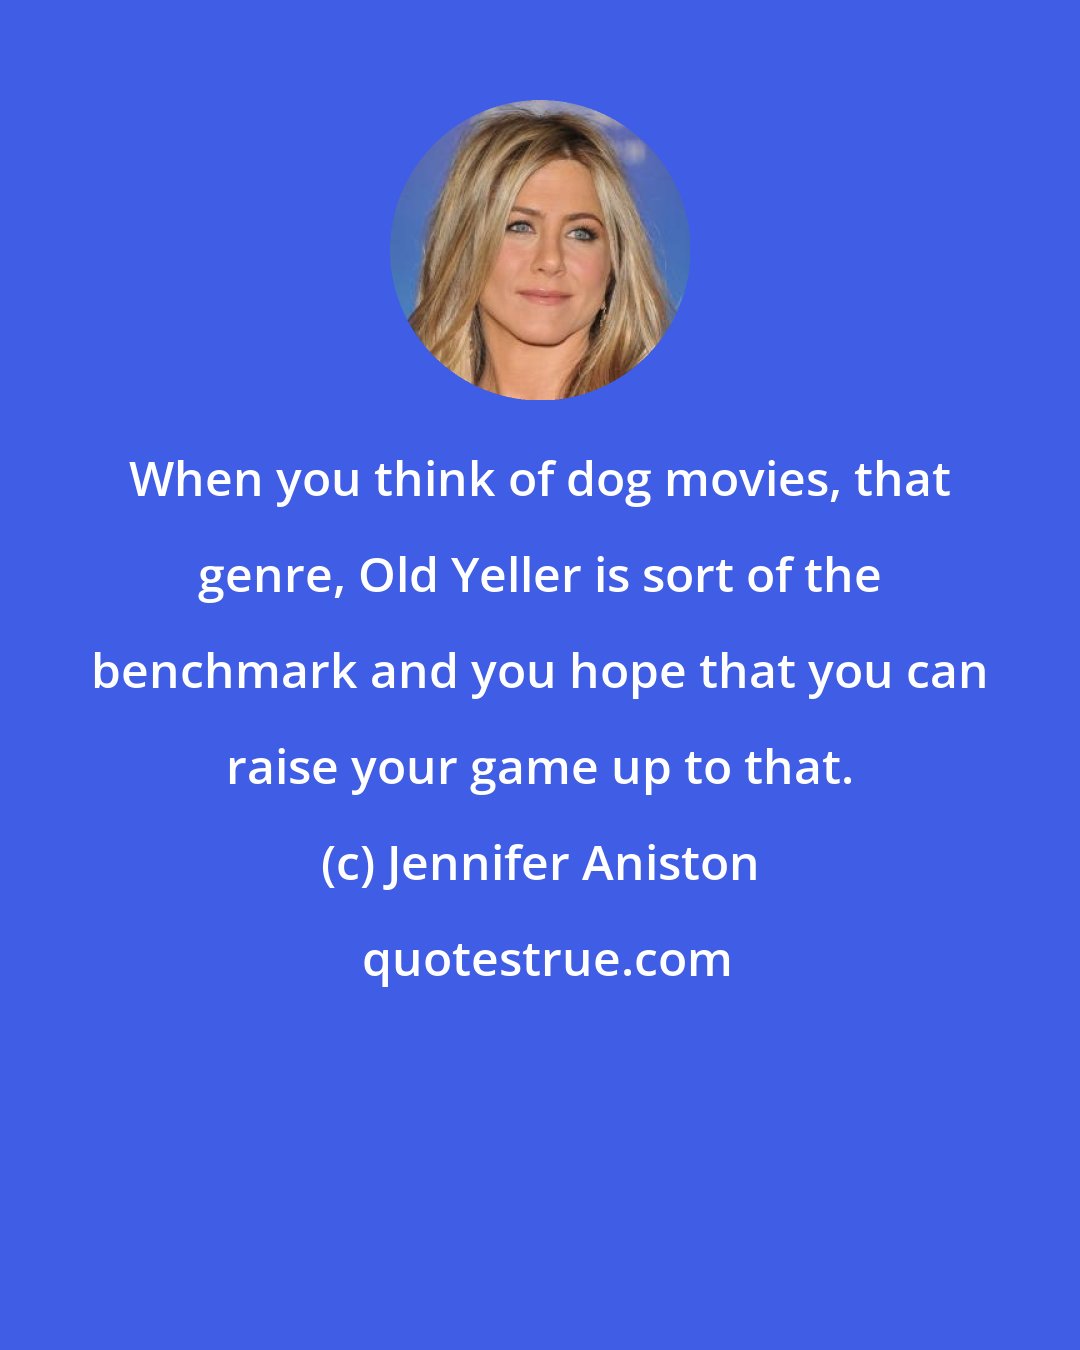 Jennifer Aniston: When you think of dog movies, that genre, Old Yeller is sort of the benchmark and you hope that you can raise your game up to that.